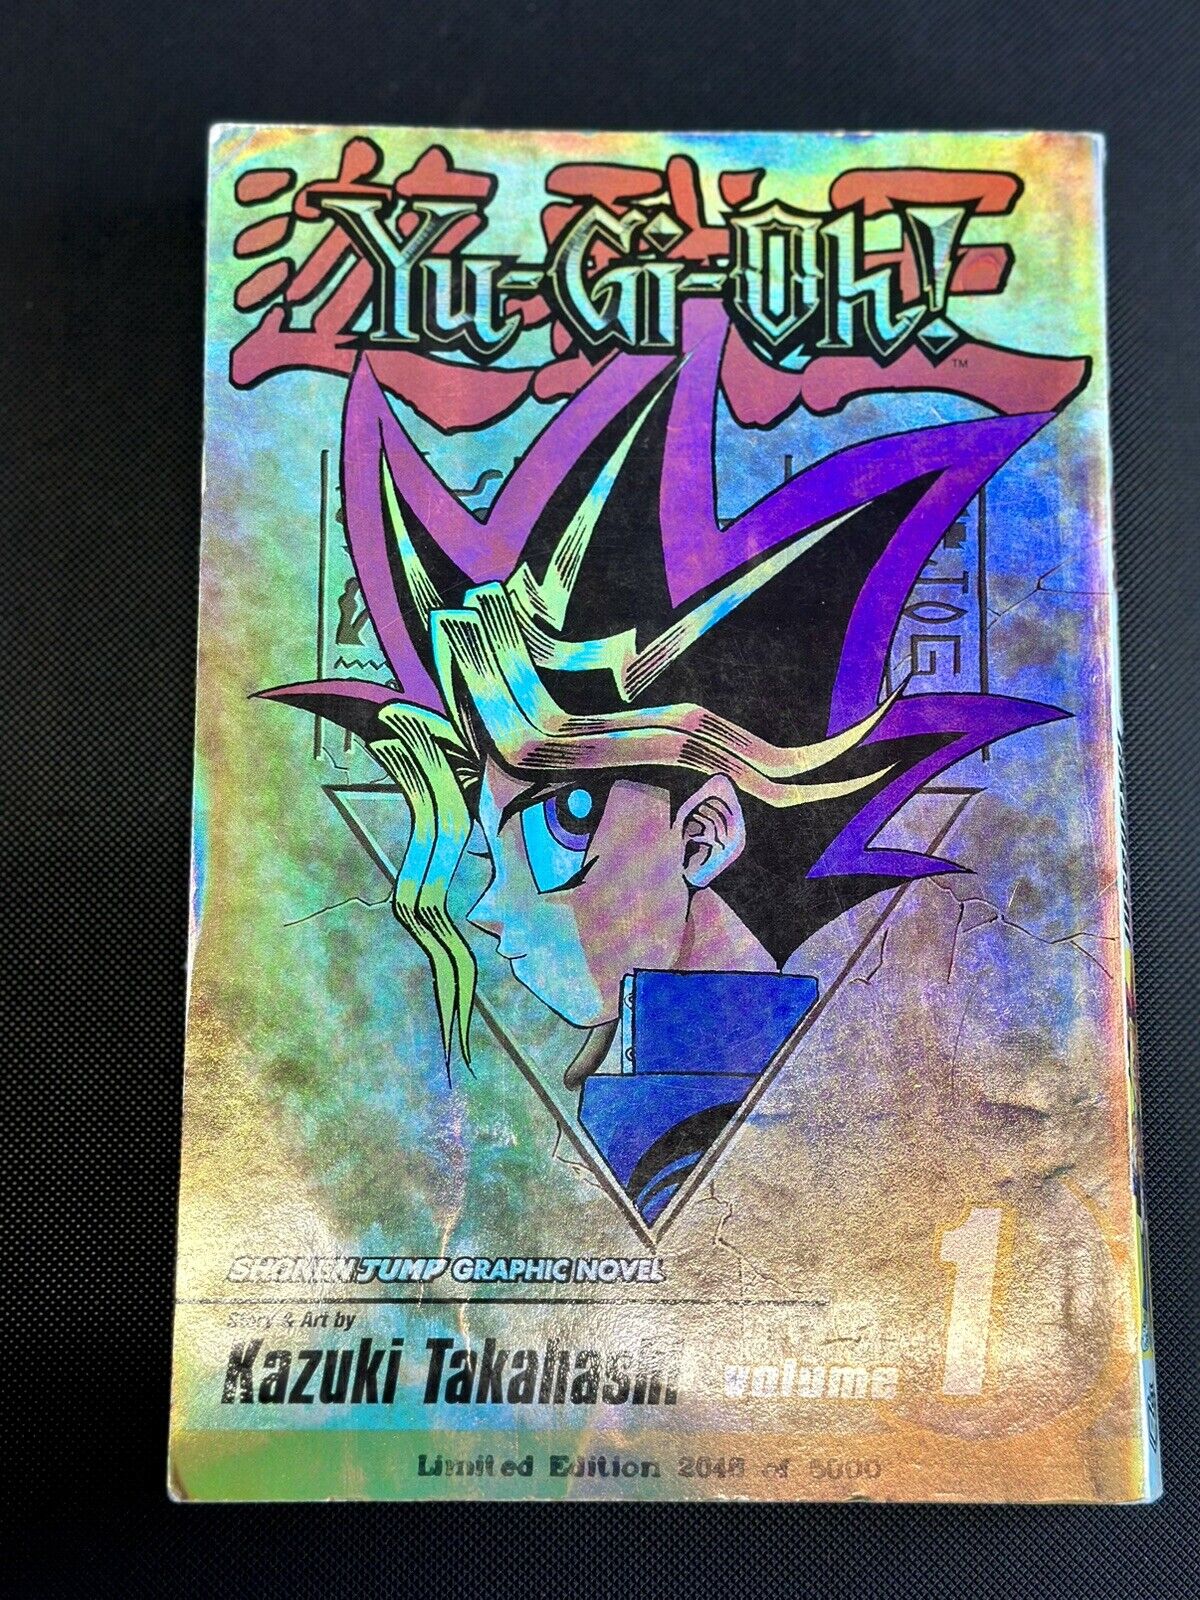 Yu-Gi-Oh Vol. 1 Limited Edition Manga Foil Cover Holographic 2048/5000 Good